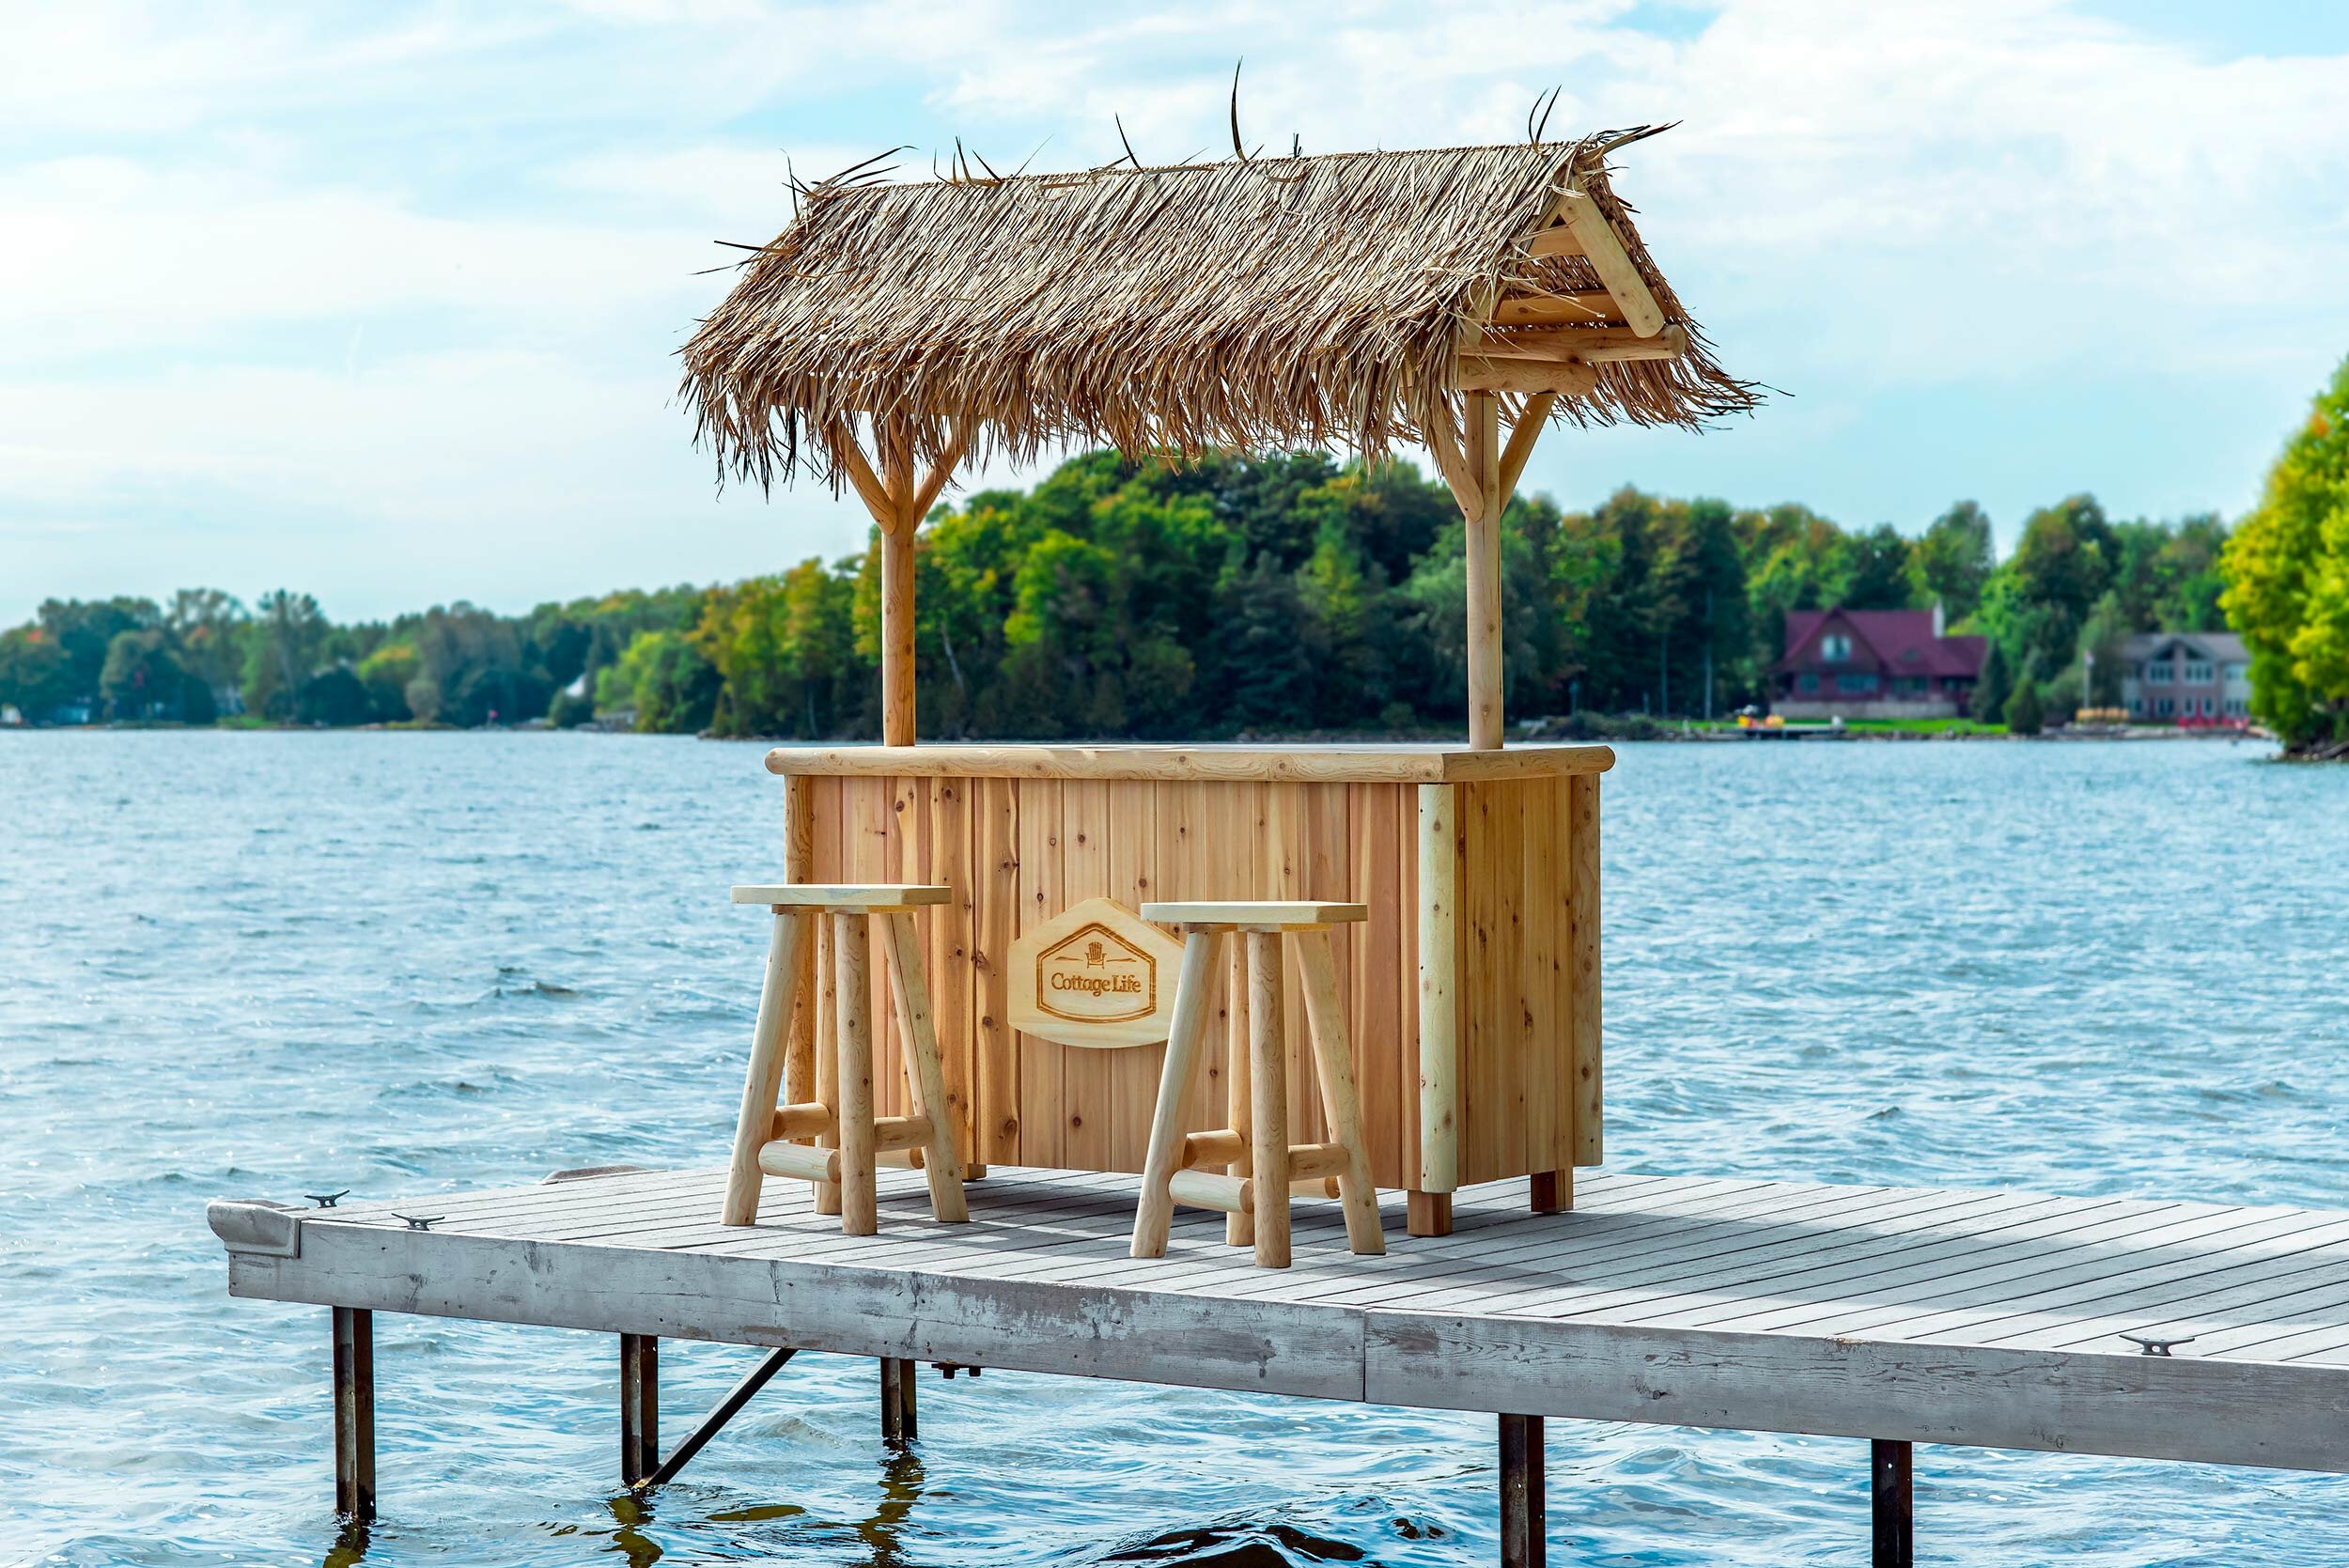 commercial-photography-tiki-bar-cottage-life-product-advertising-photographer-paul-george.jpg